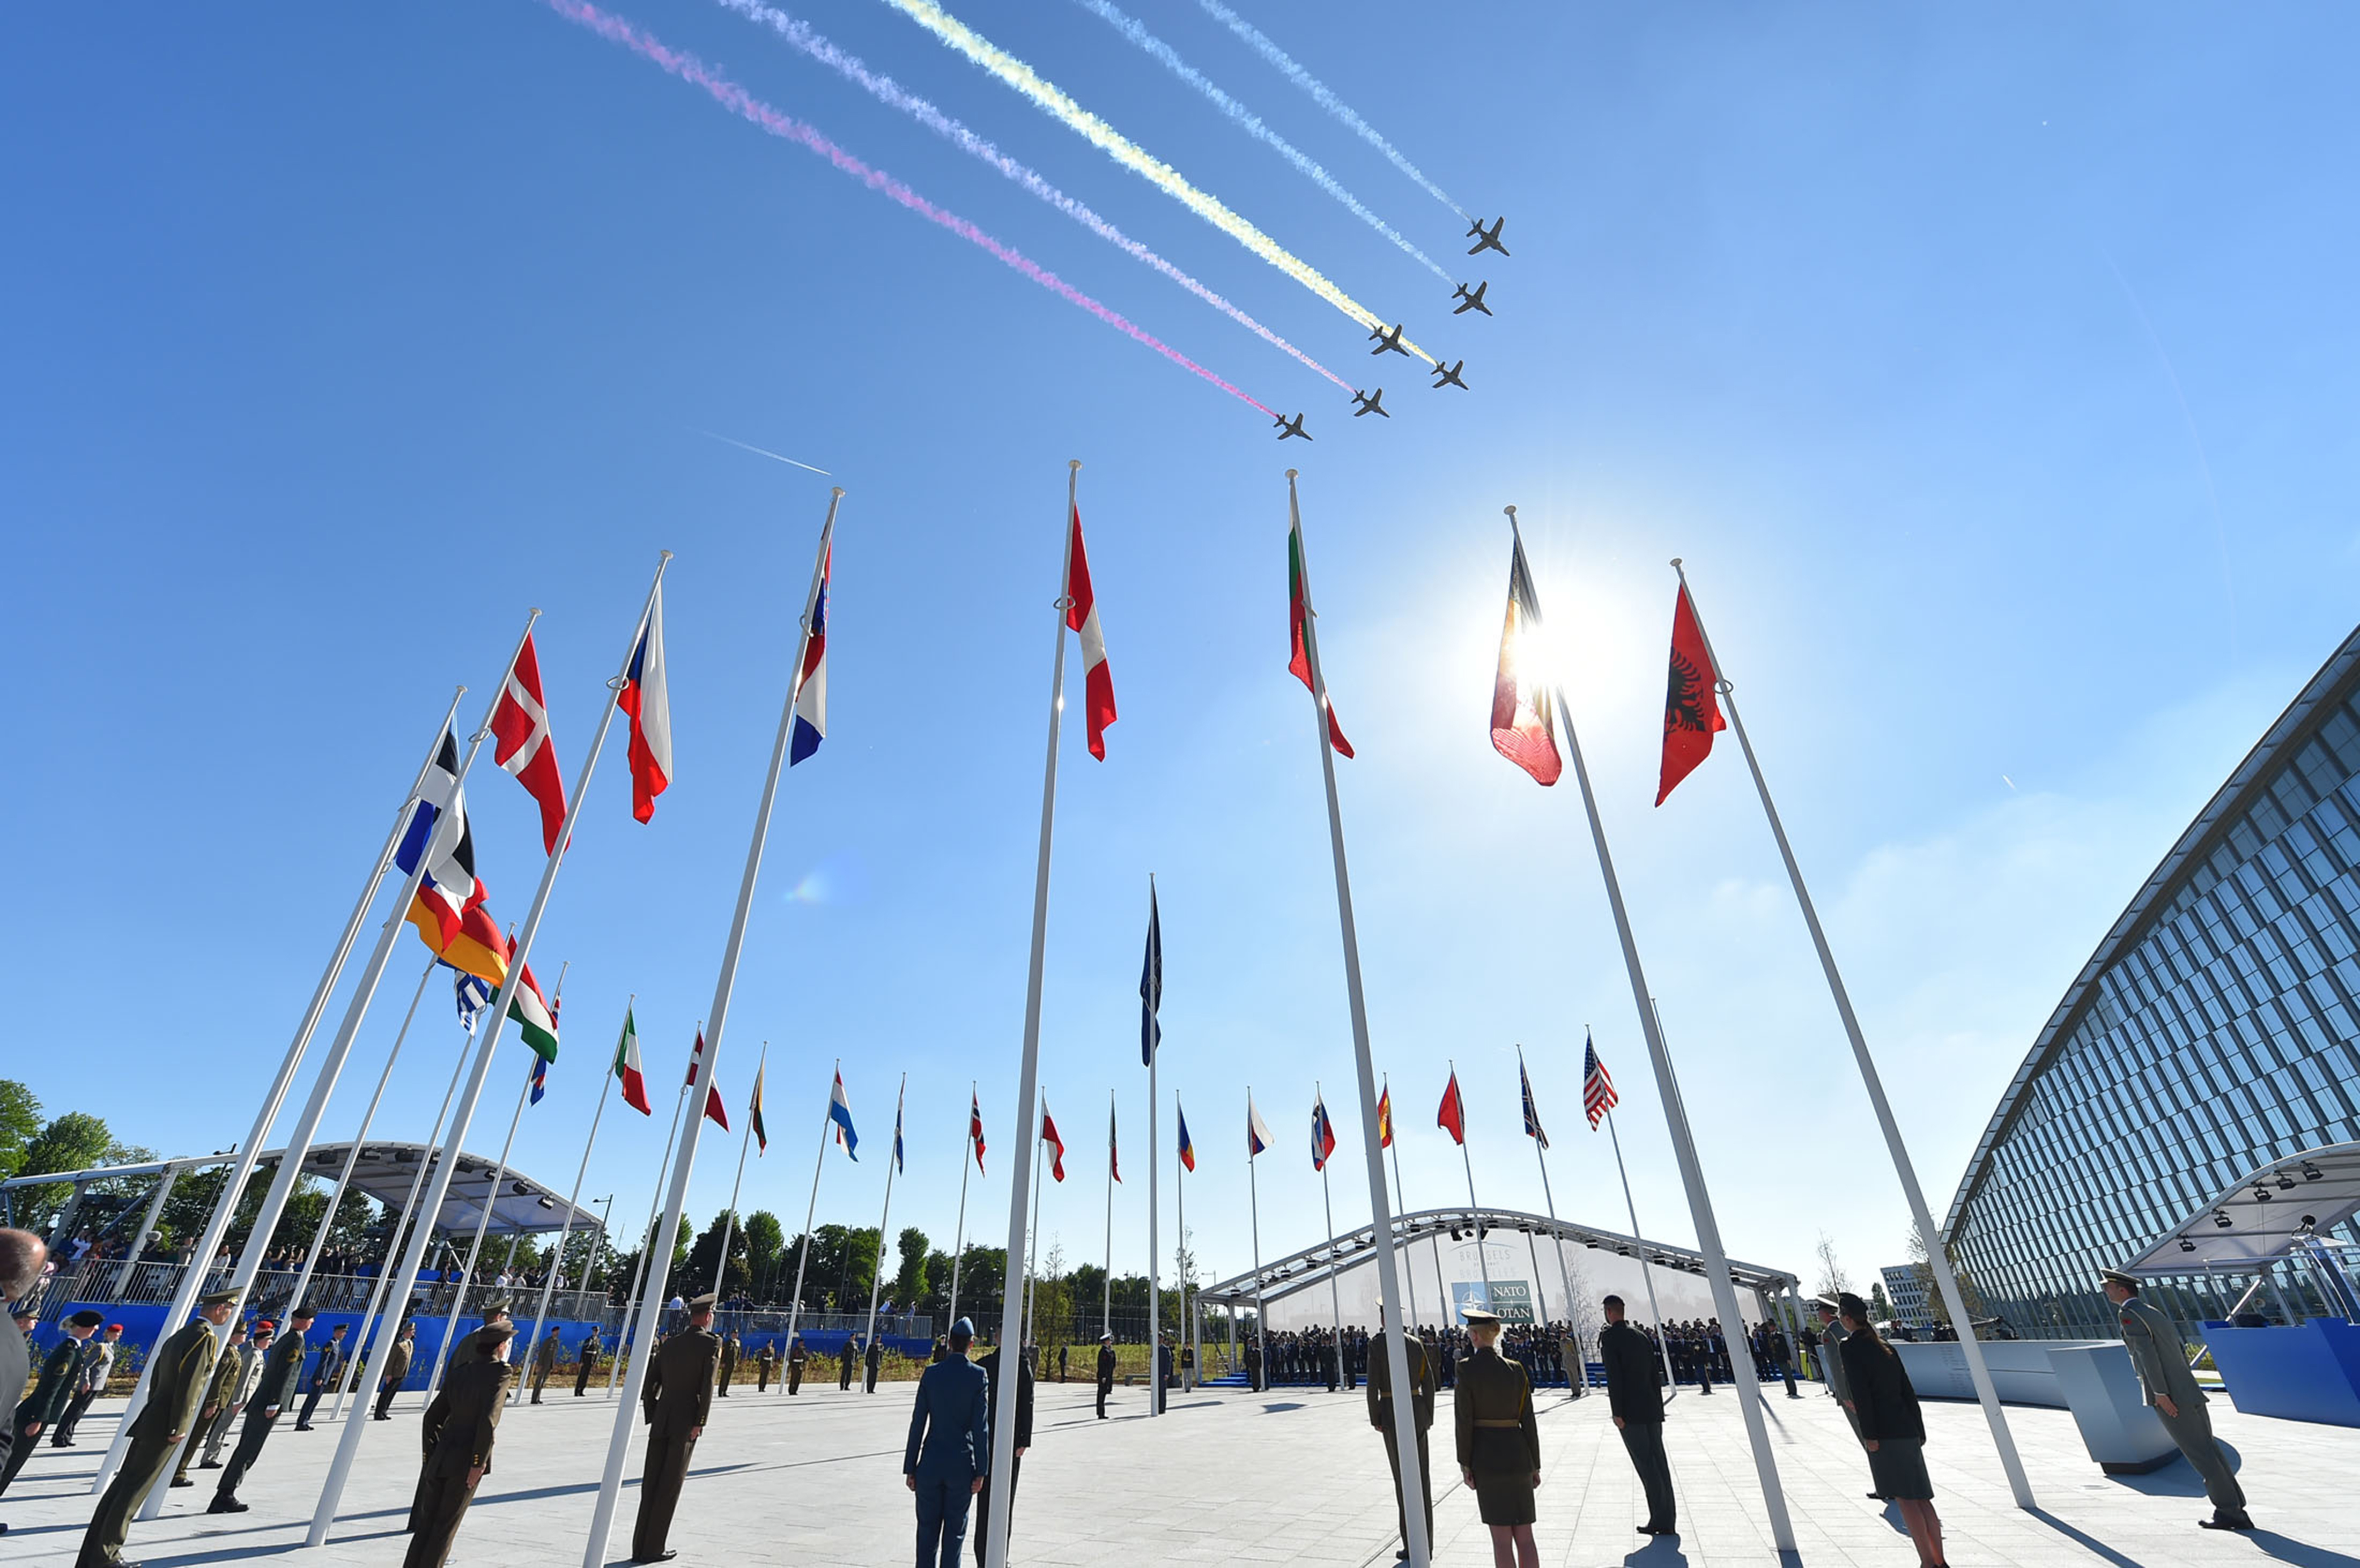 New NATO Headquarters Handover Ceremony and Fly-past - Meeting of NATO Heads of State and Government in Brussels.